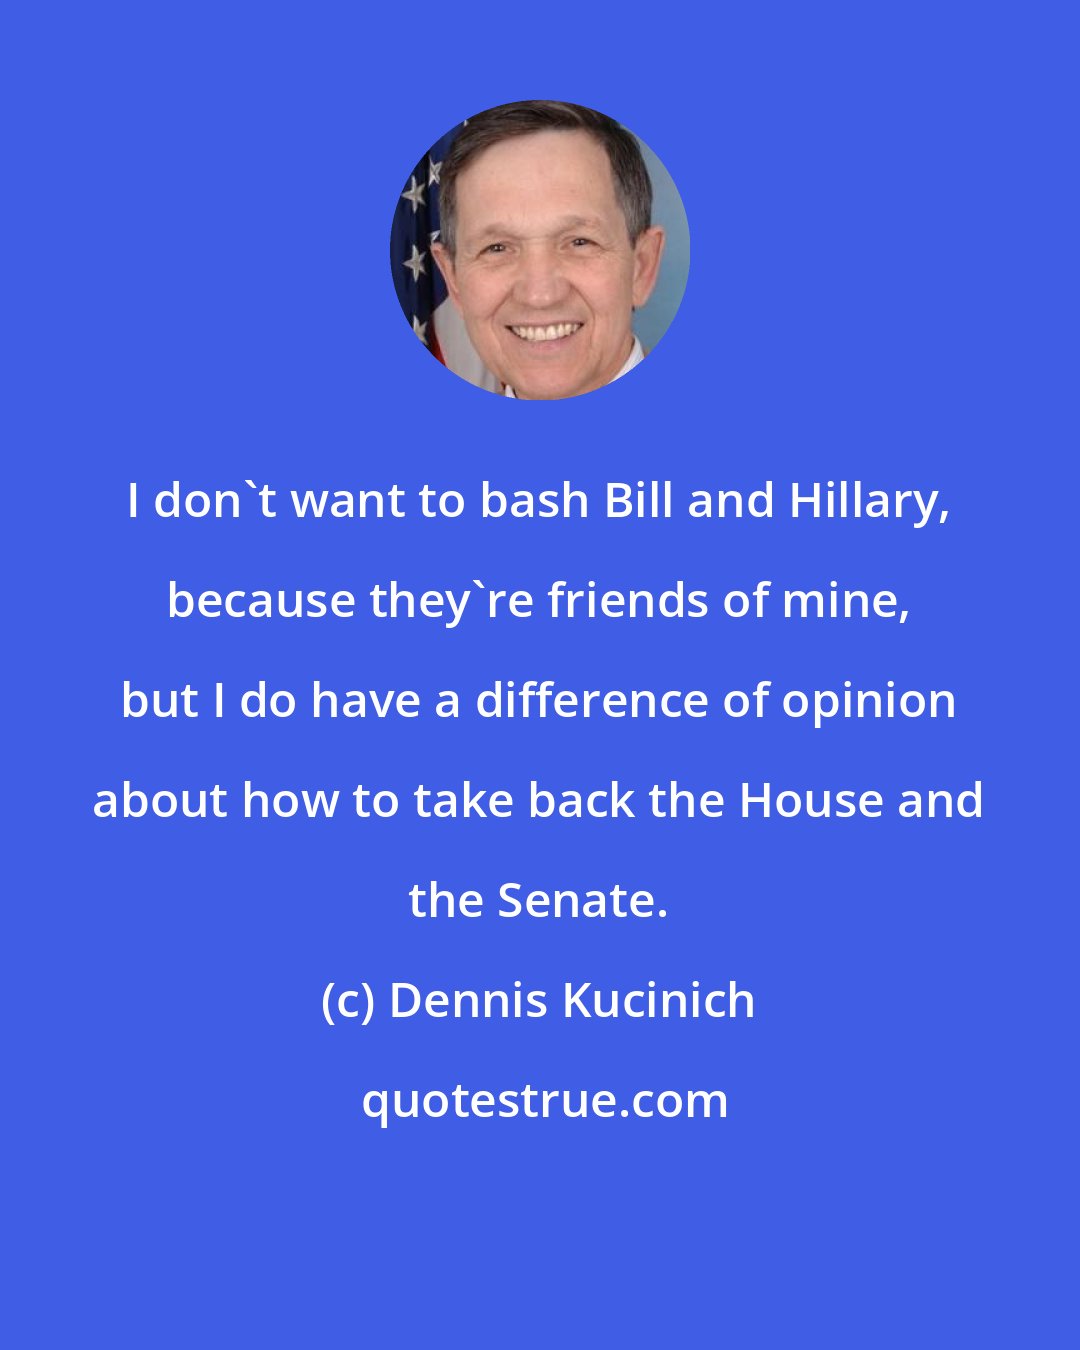 Dennis Kucinich: I don't want to bash Bill and Hillary, because they're friends of mine, but I do have a difference of opinion about how to take back the House and the Senate.